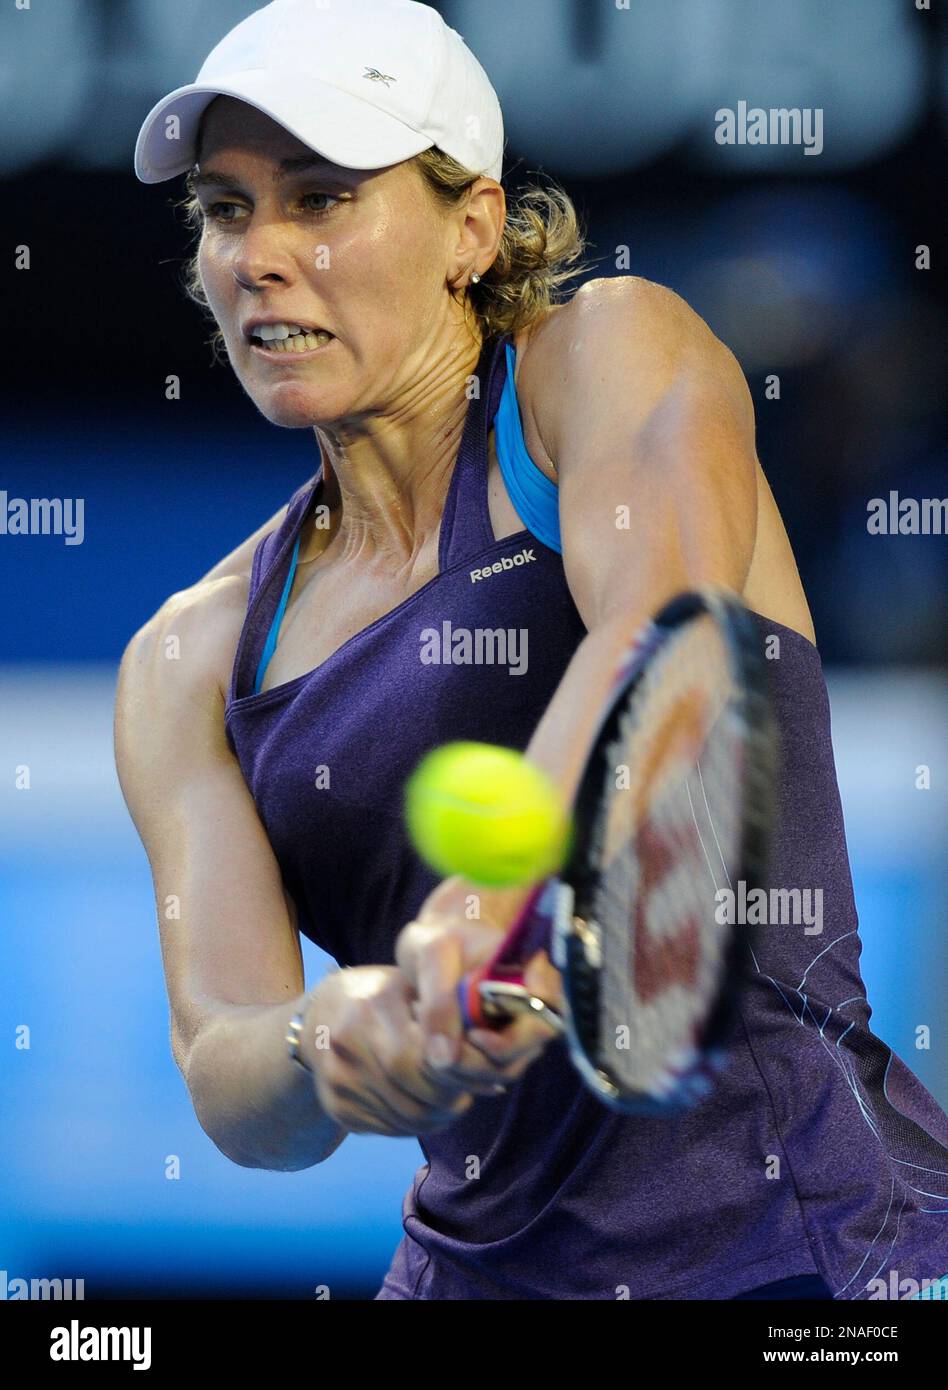 Hungary's Greta Arn plays a shot during her third round match against  Serena Williams of the US at the Australian Open tennis championship, in  Melbourne, Australia, Saturday, Jan. 21, 2012.(AP Photo/Andrew Brownbill